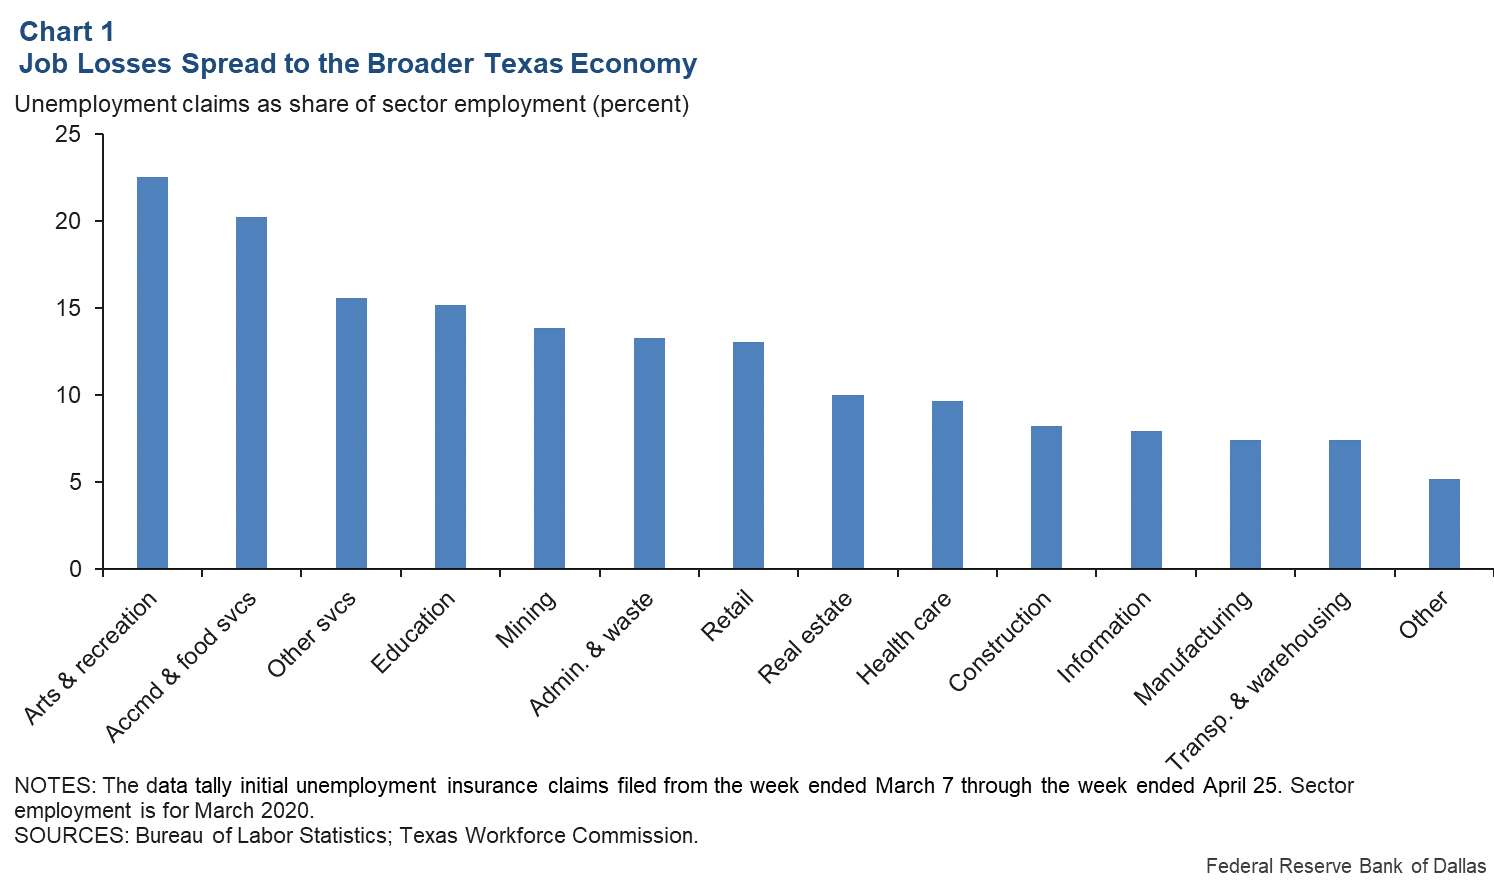 Chart 1: Job Losses Spread to the Broader Texas Economy